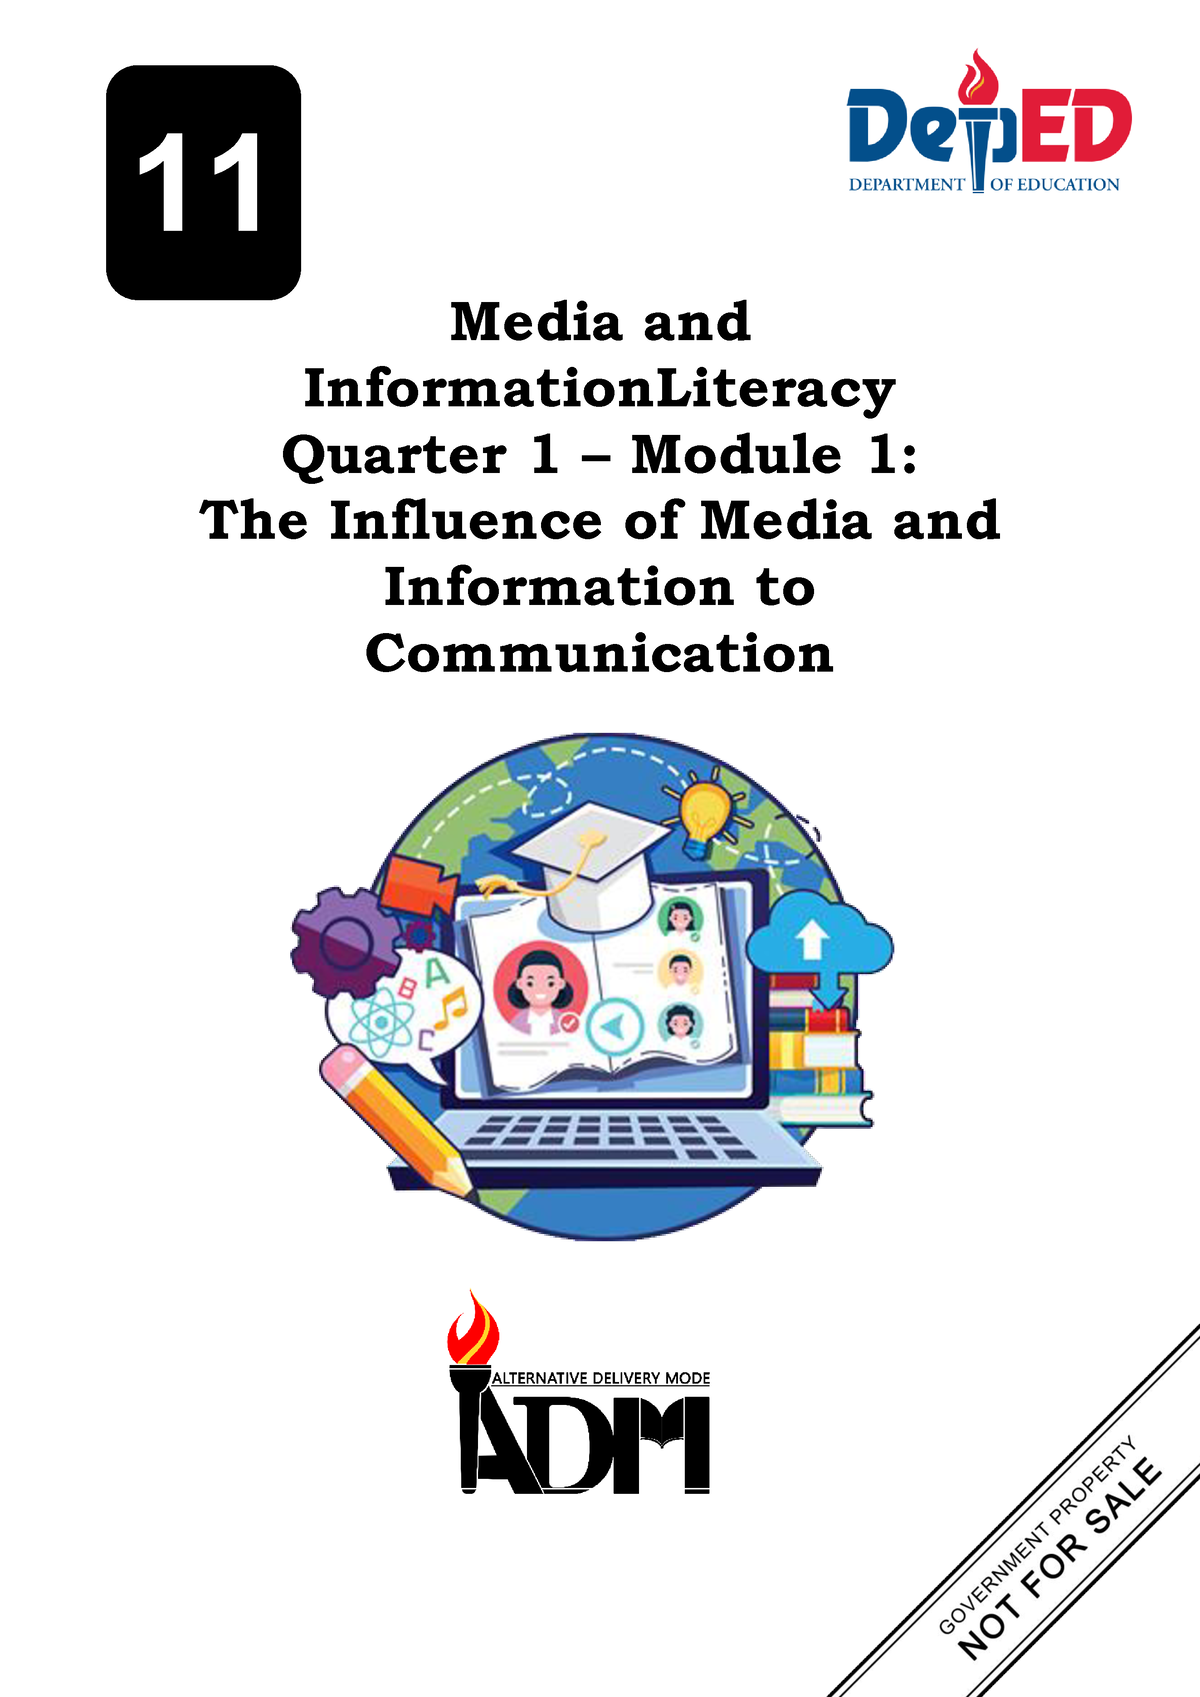 how do media and information influence communication essay